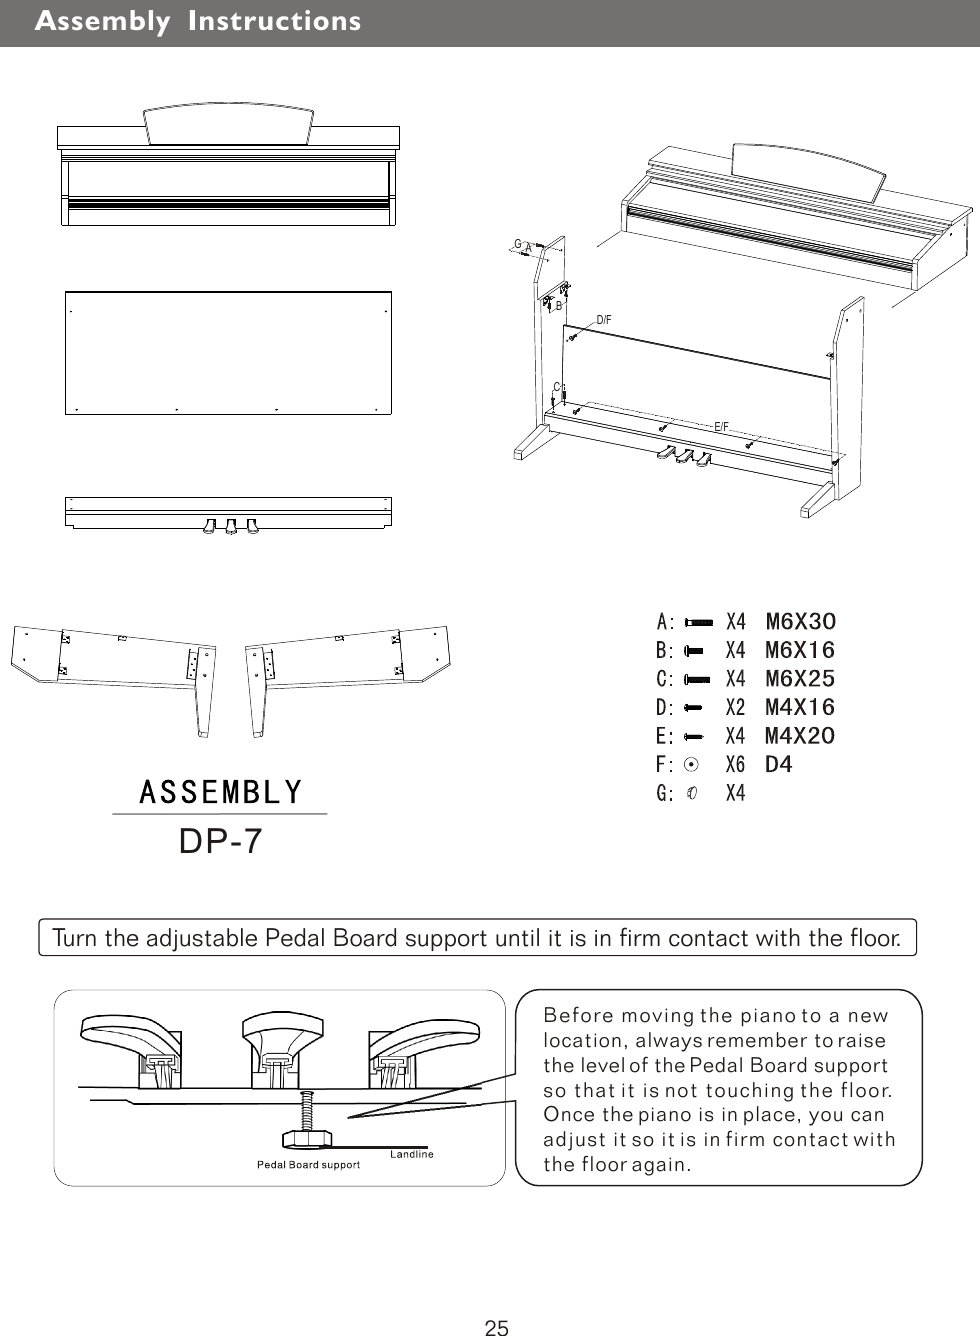 Before moving the piano to a new location, always remember to raise the level of the Pedal Board support so that it is not touching the floor. Once the piano is in place, you can adjust it so it is in firm contact with the floor again.Turn the adjustable Pedal Board support until it is in firm contact with the floor.DP-7Assembly  Instructions25ABD/FCE/FG